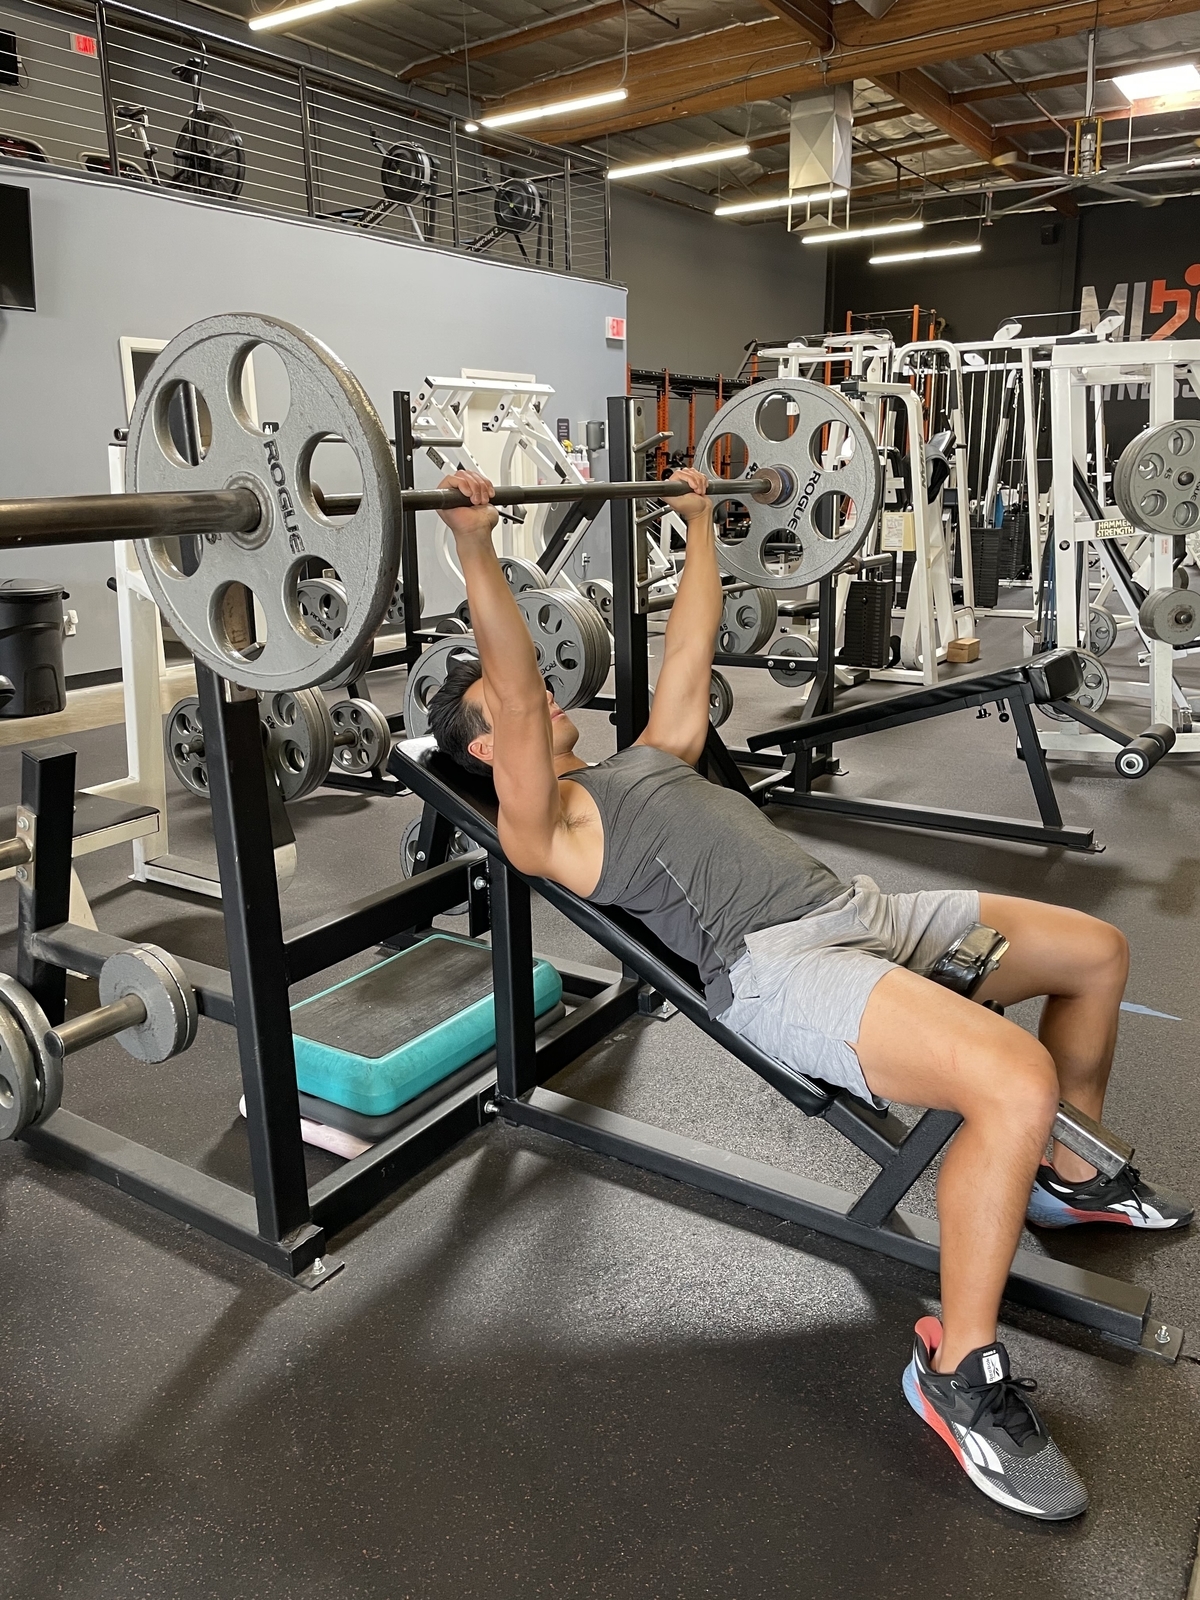 13 - Incline barbell bench press